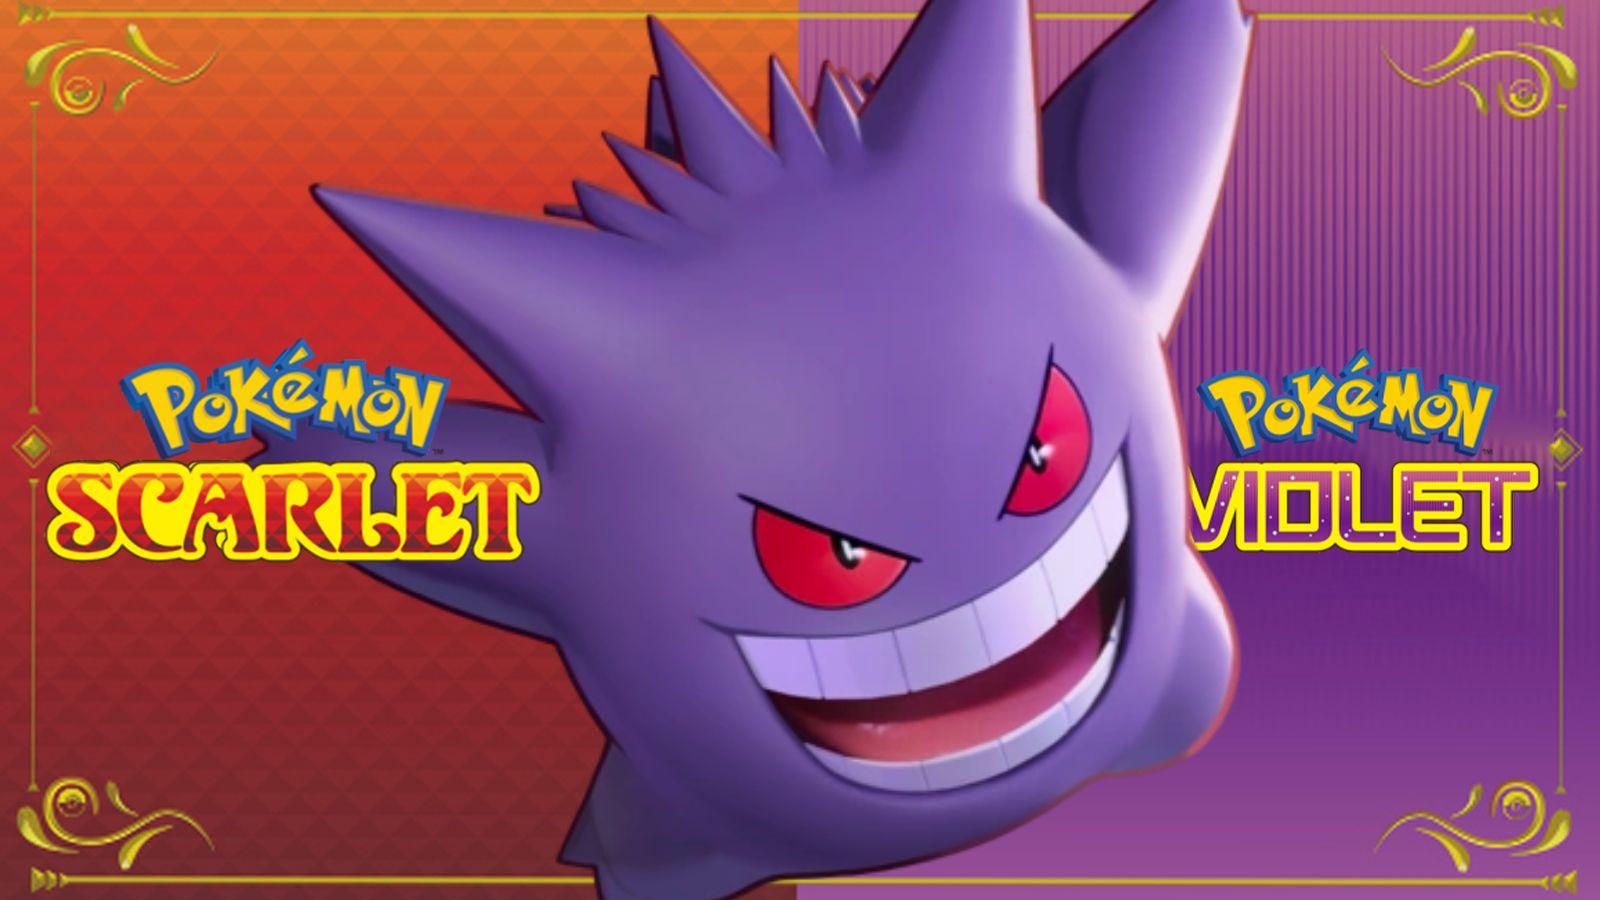 Can you complete the Pokémon Scarlet and Violet pokédex without trading or  using Pokémon Home? - Gamer Journalist